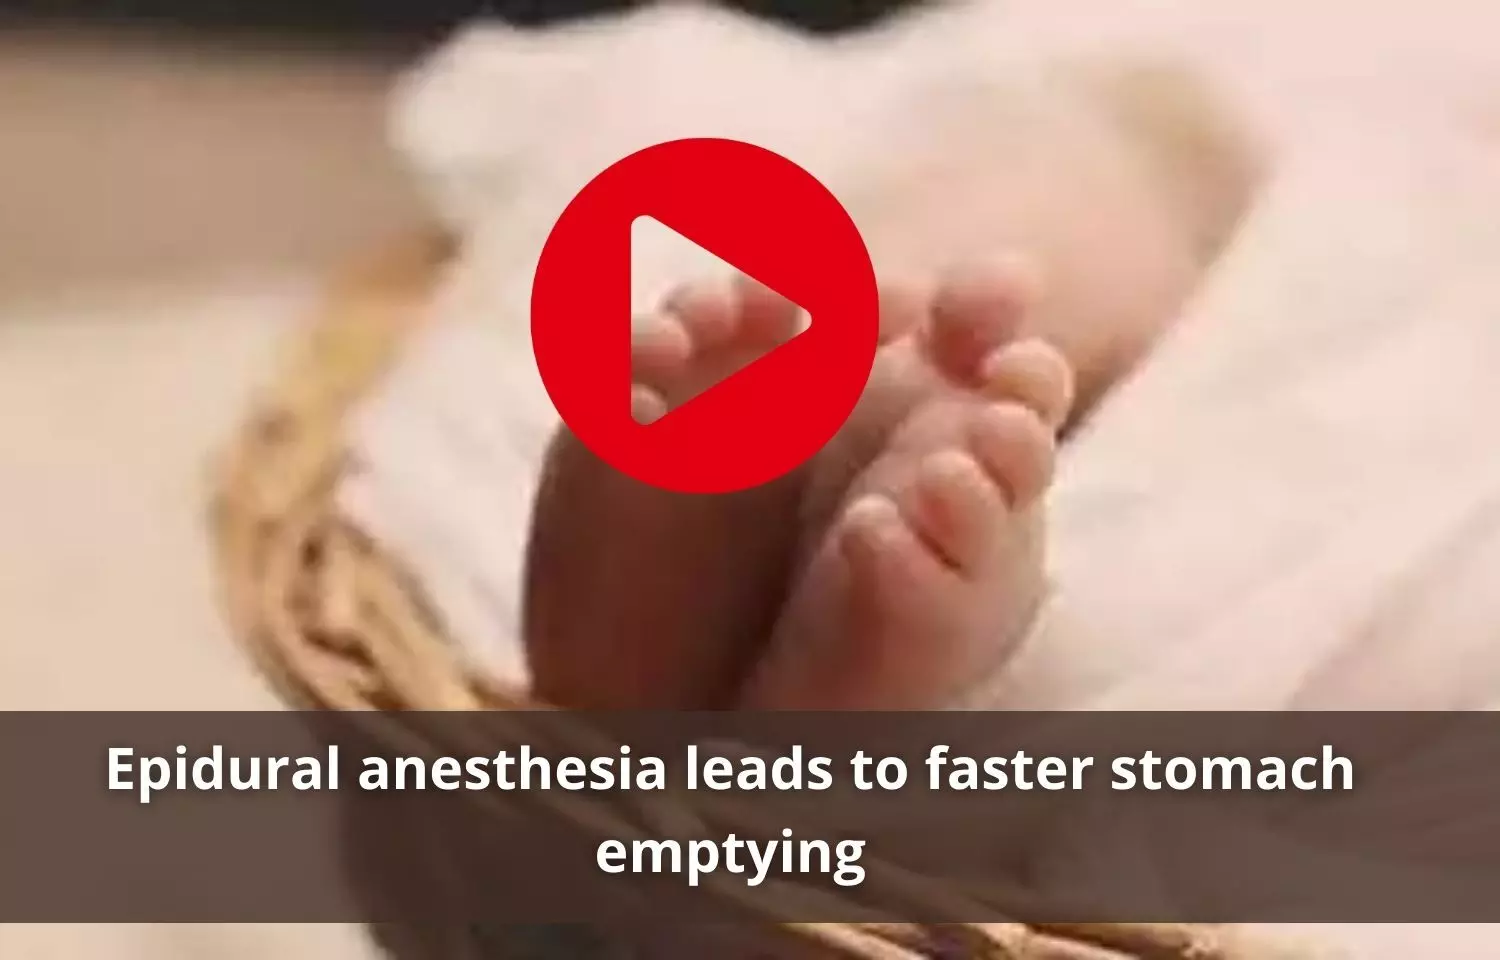 Epidural anesthesia helps faster stomach emptying during labour